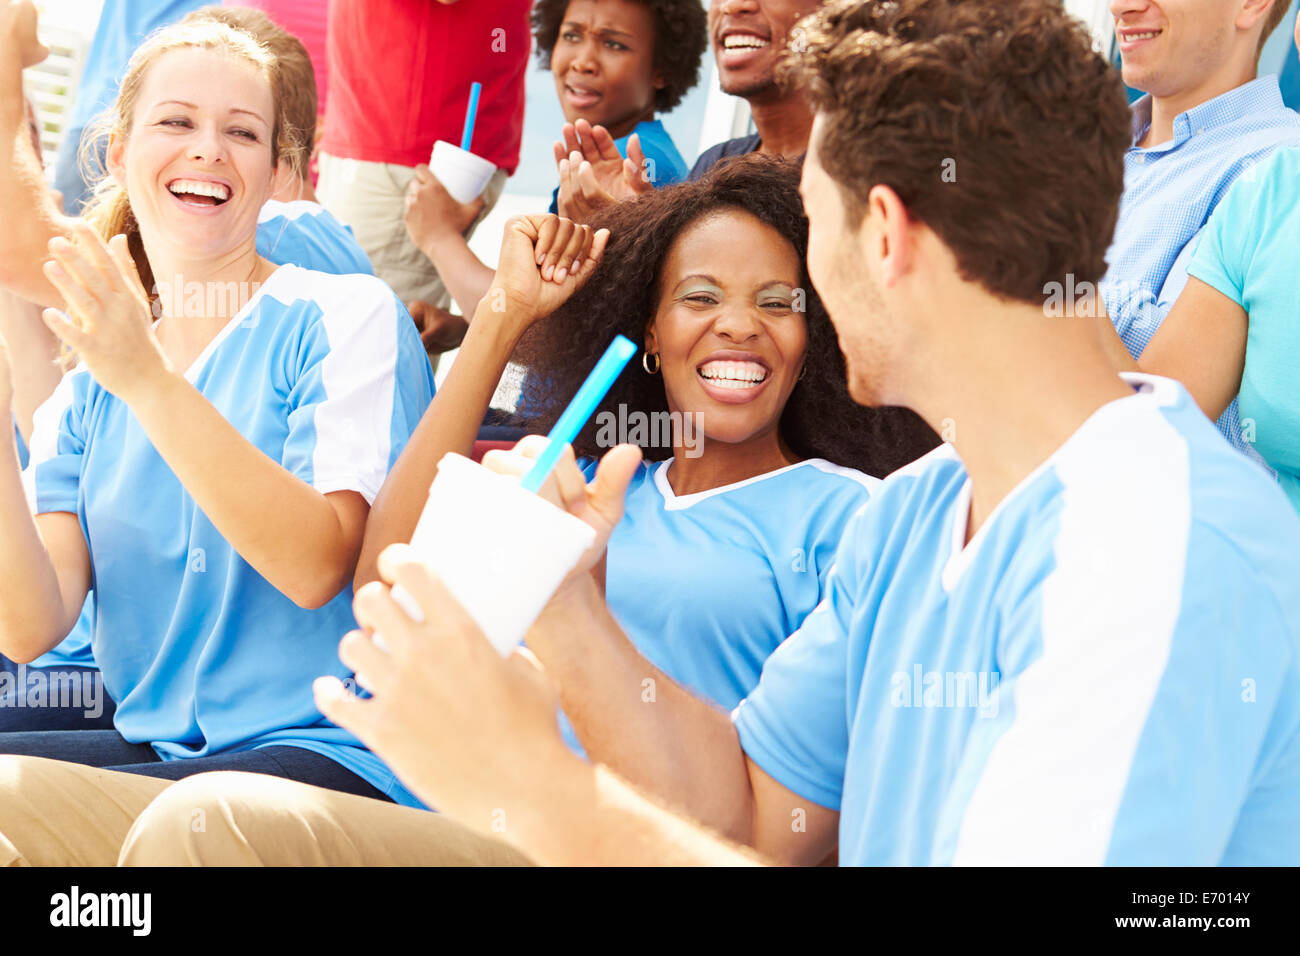 Spectators In Team Colors Watching Sports Event Stock Photo